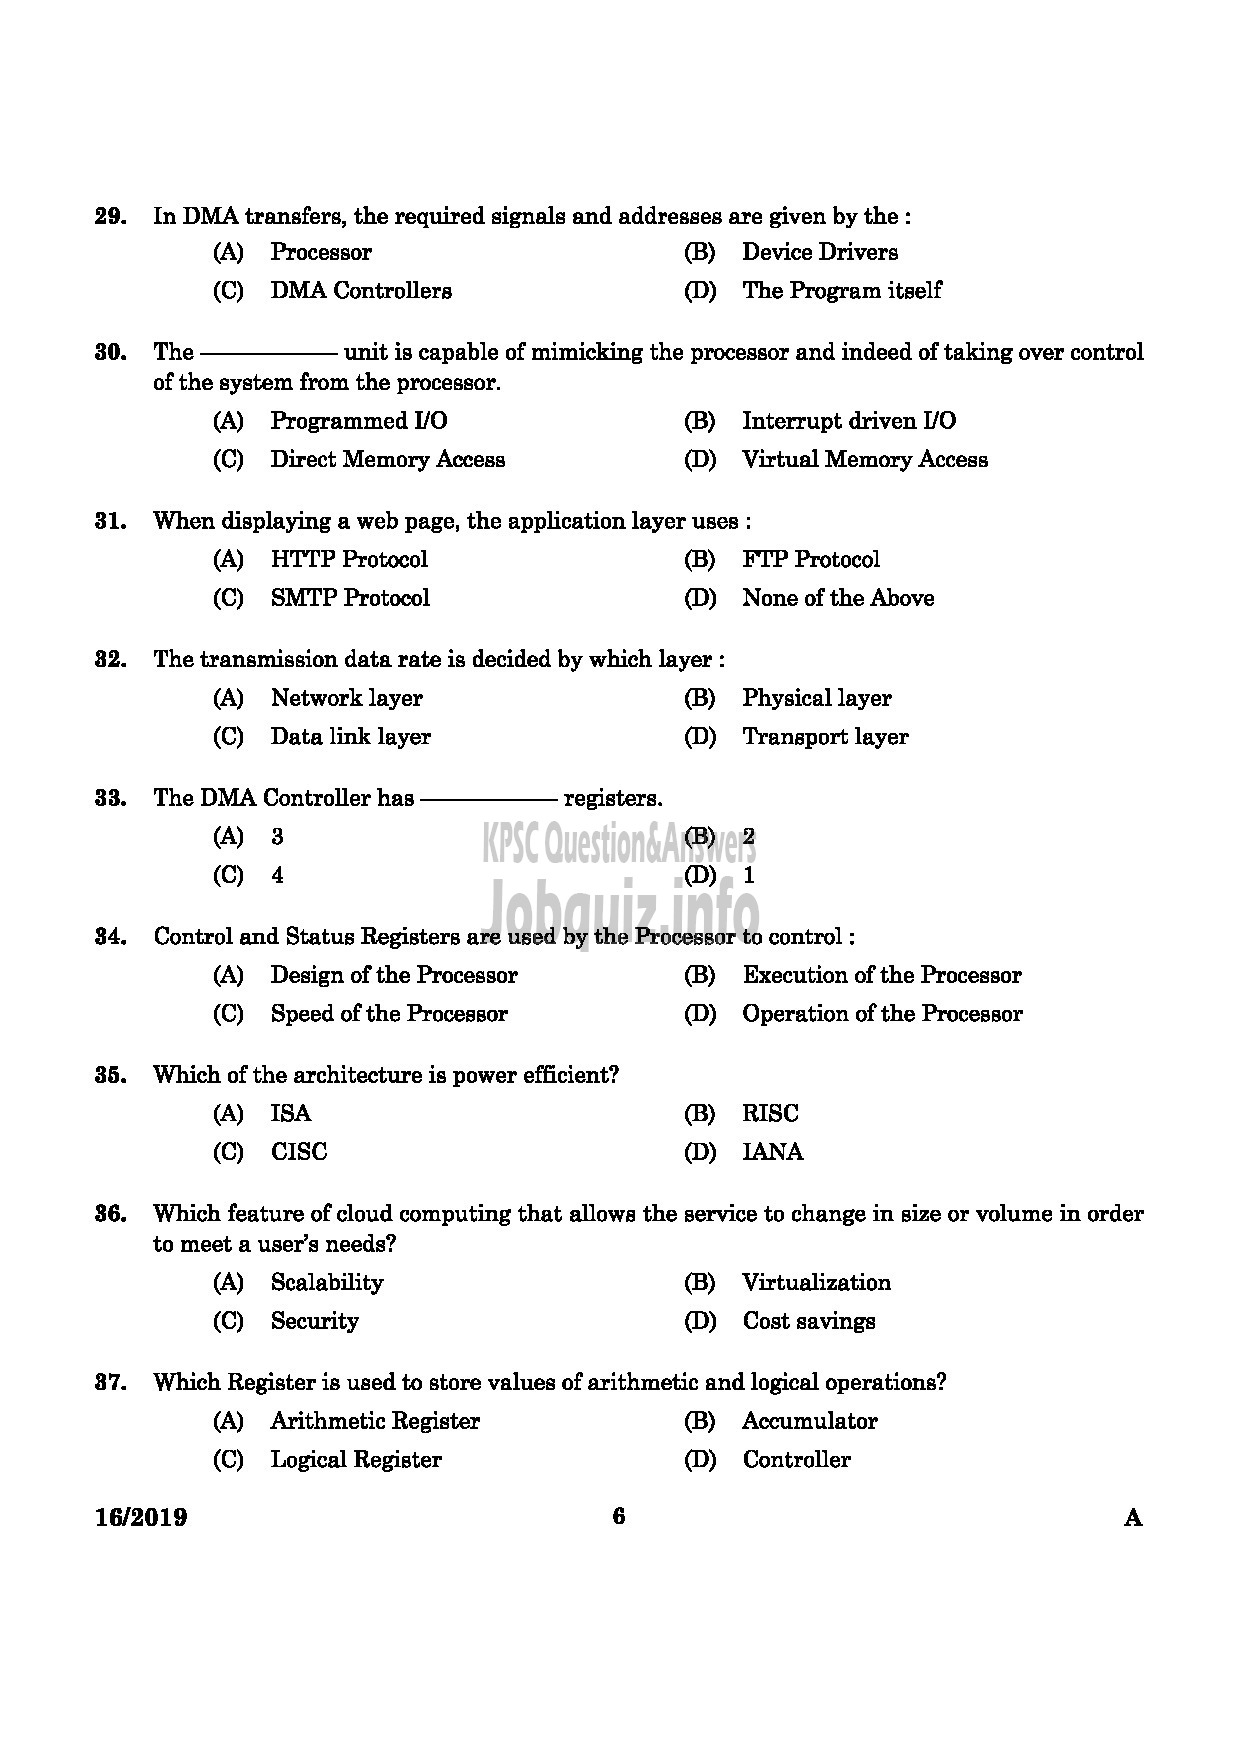 Kerala PSC Question Paper - JUNIOR INSTRUCTOR SOFTWARE TESTING ASSISTANT INDUSTRIAL TRAINING -4